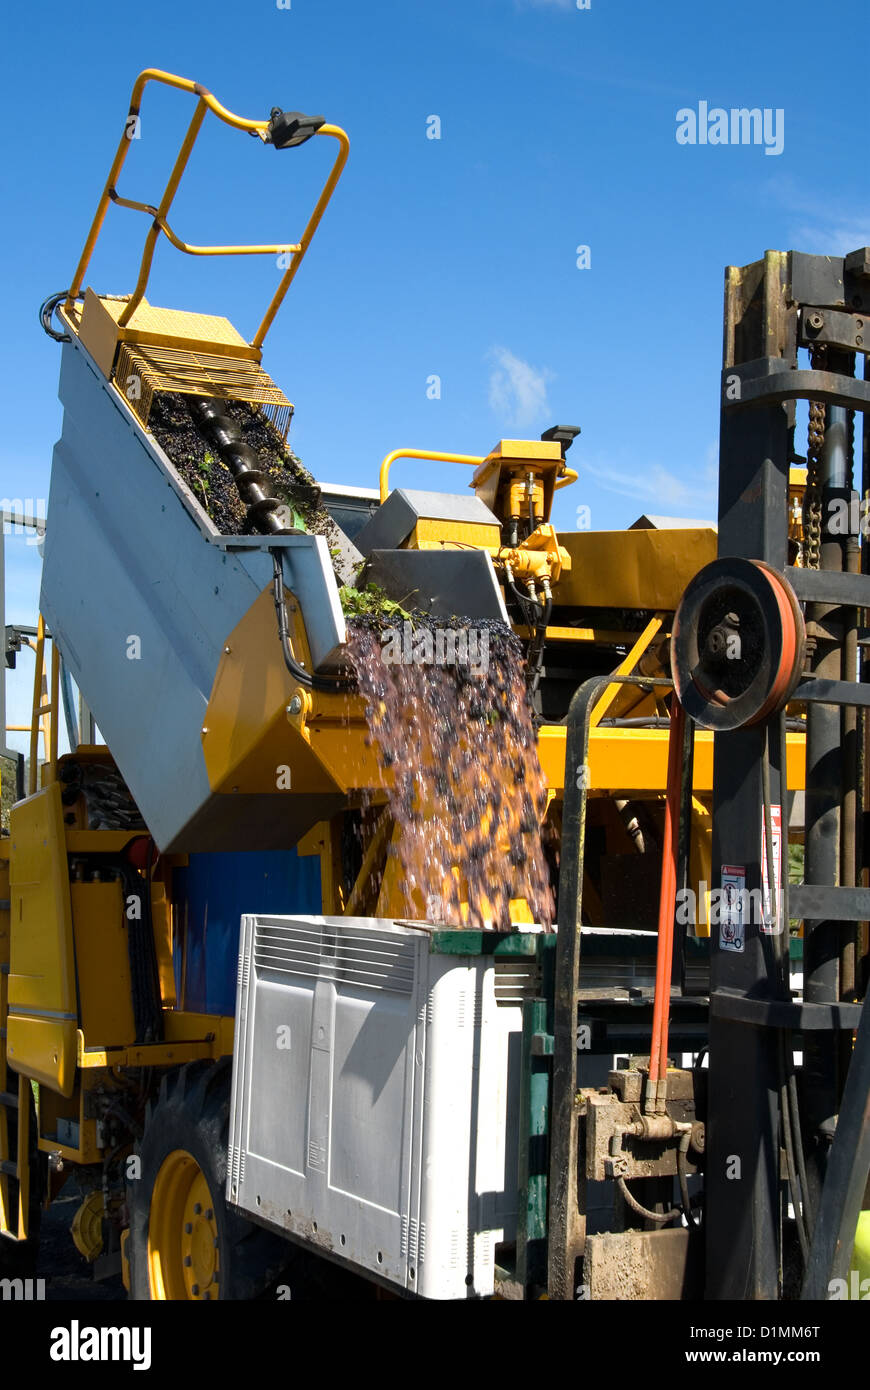 A grape harvester unloading grapes into a bin on a forklift Stock Photo